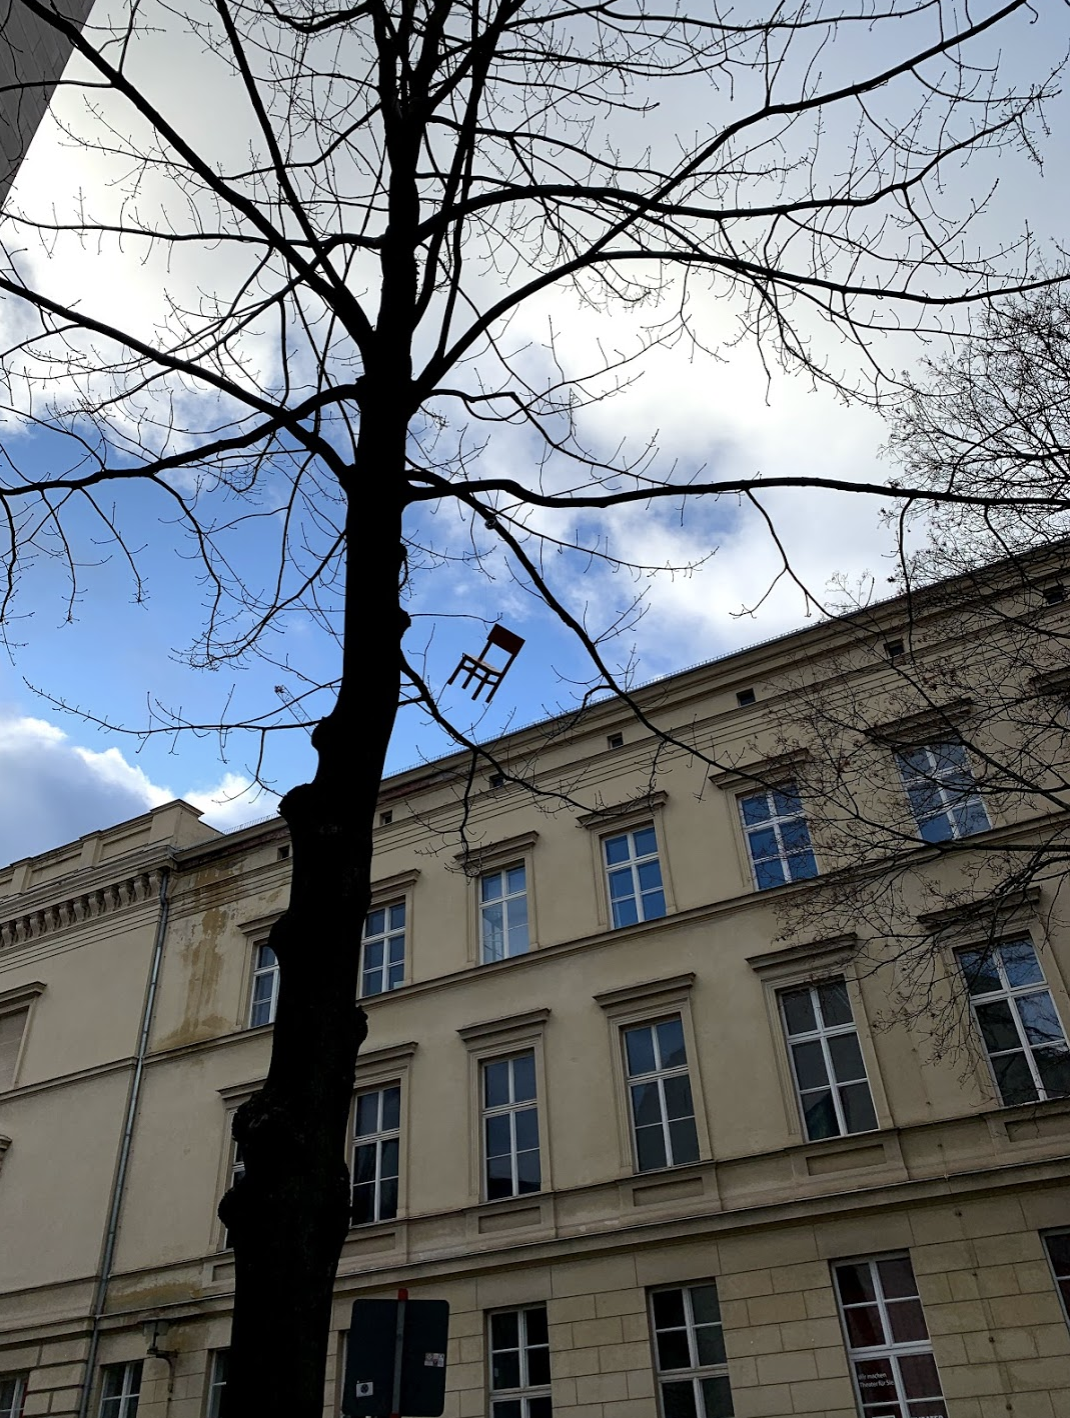 Tiny chair in a tree in Berlin, Germany